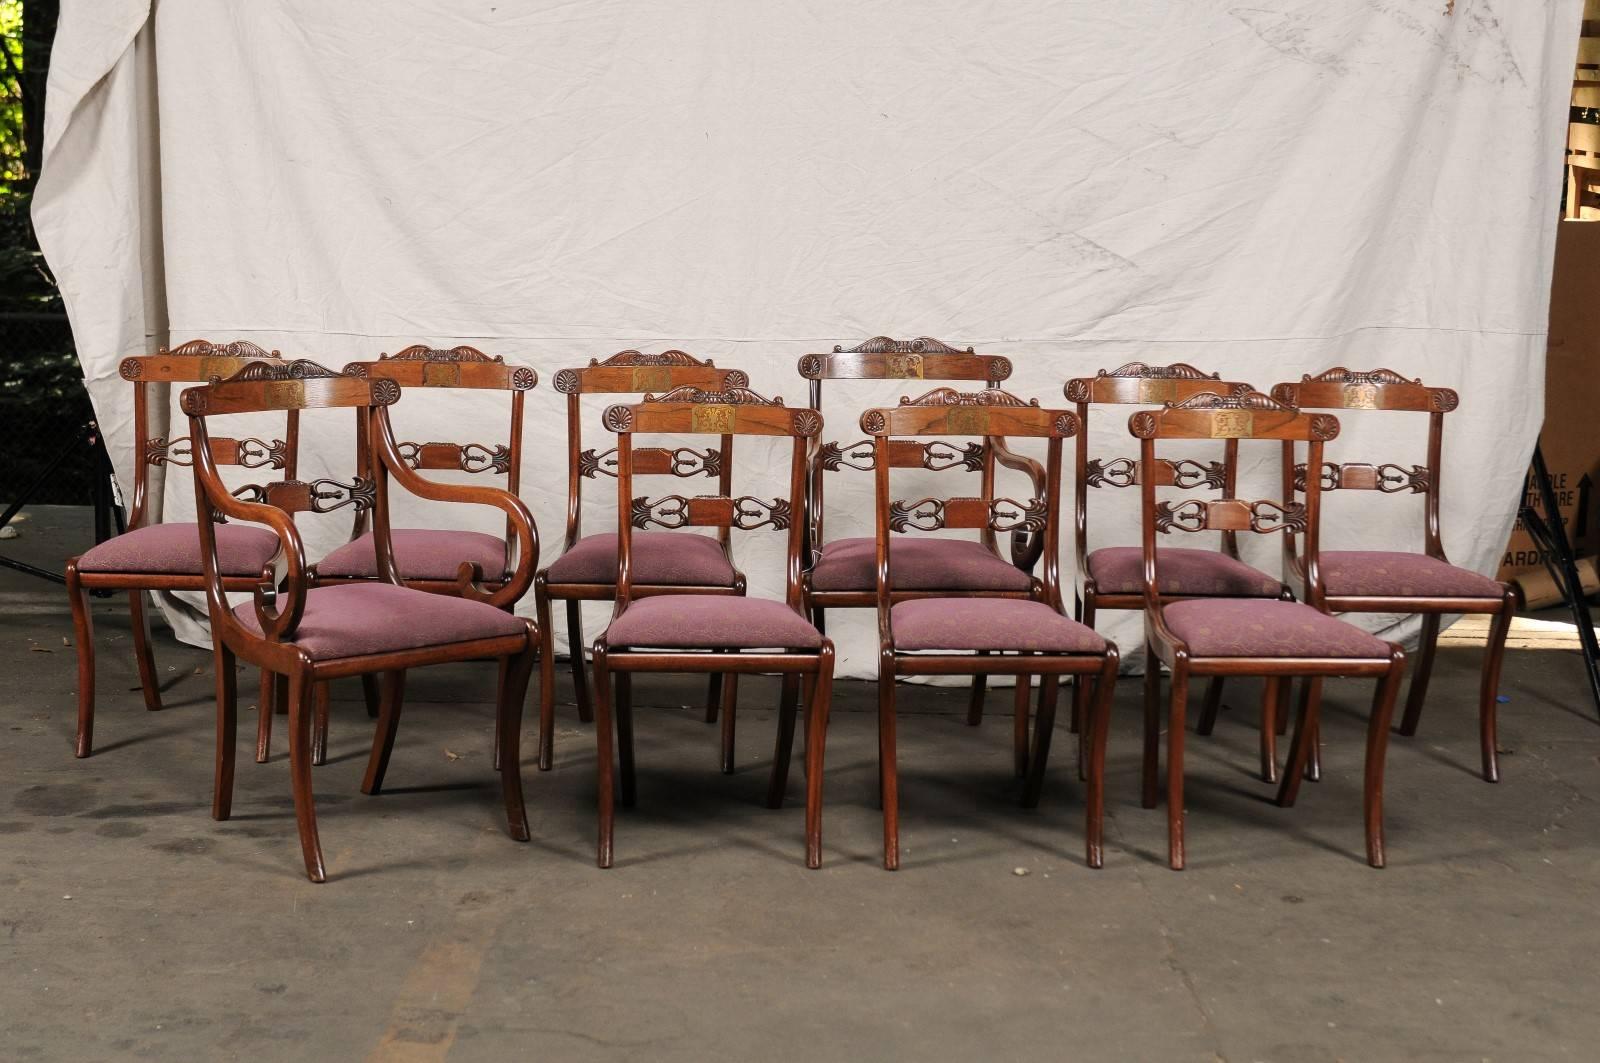 Set of Ten Regency Style Dining Chairs, Circa 1900, Rosewood, Mahogany and Brass Inlay, Beautiful Carving, Very Comfortable, Large Seats Eight Side Chairs, Two Armchairs. 